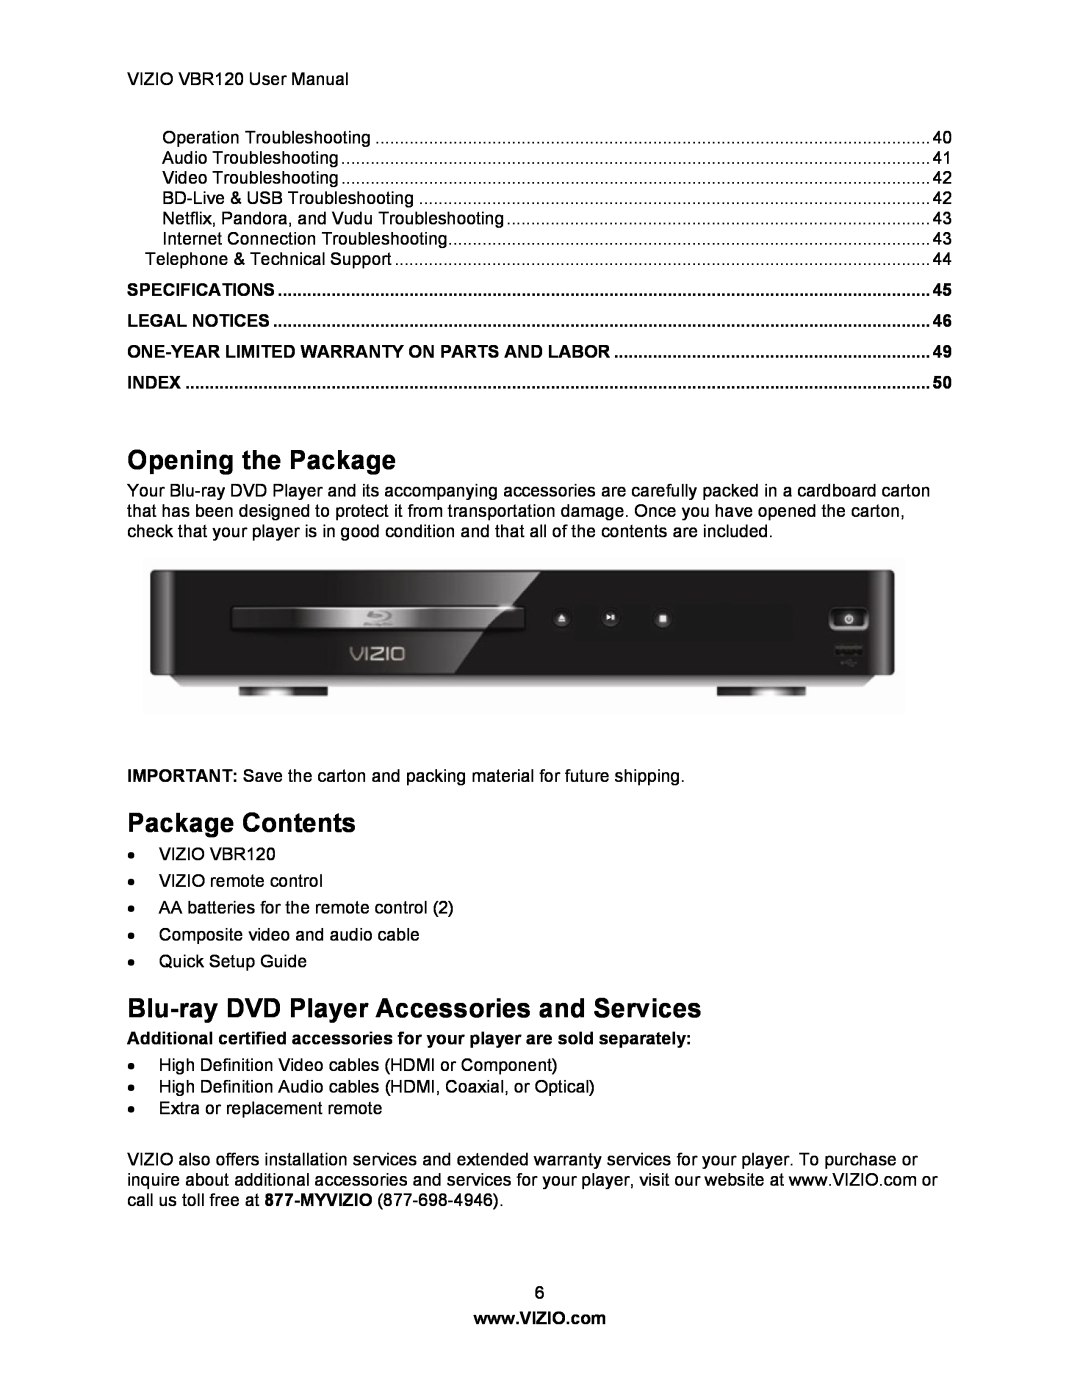 Vizio VBR 120 user manual Opening the Package, Package Contents, Blu-ray DVD Player Accessories and Services 